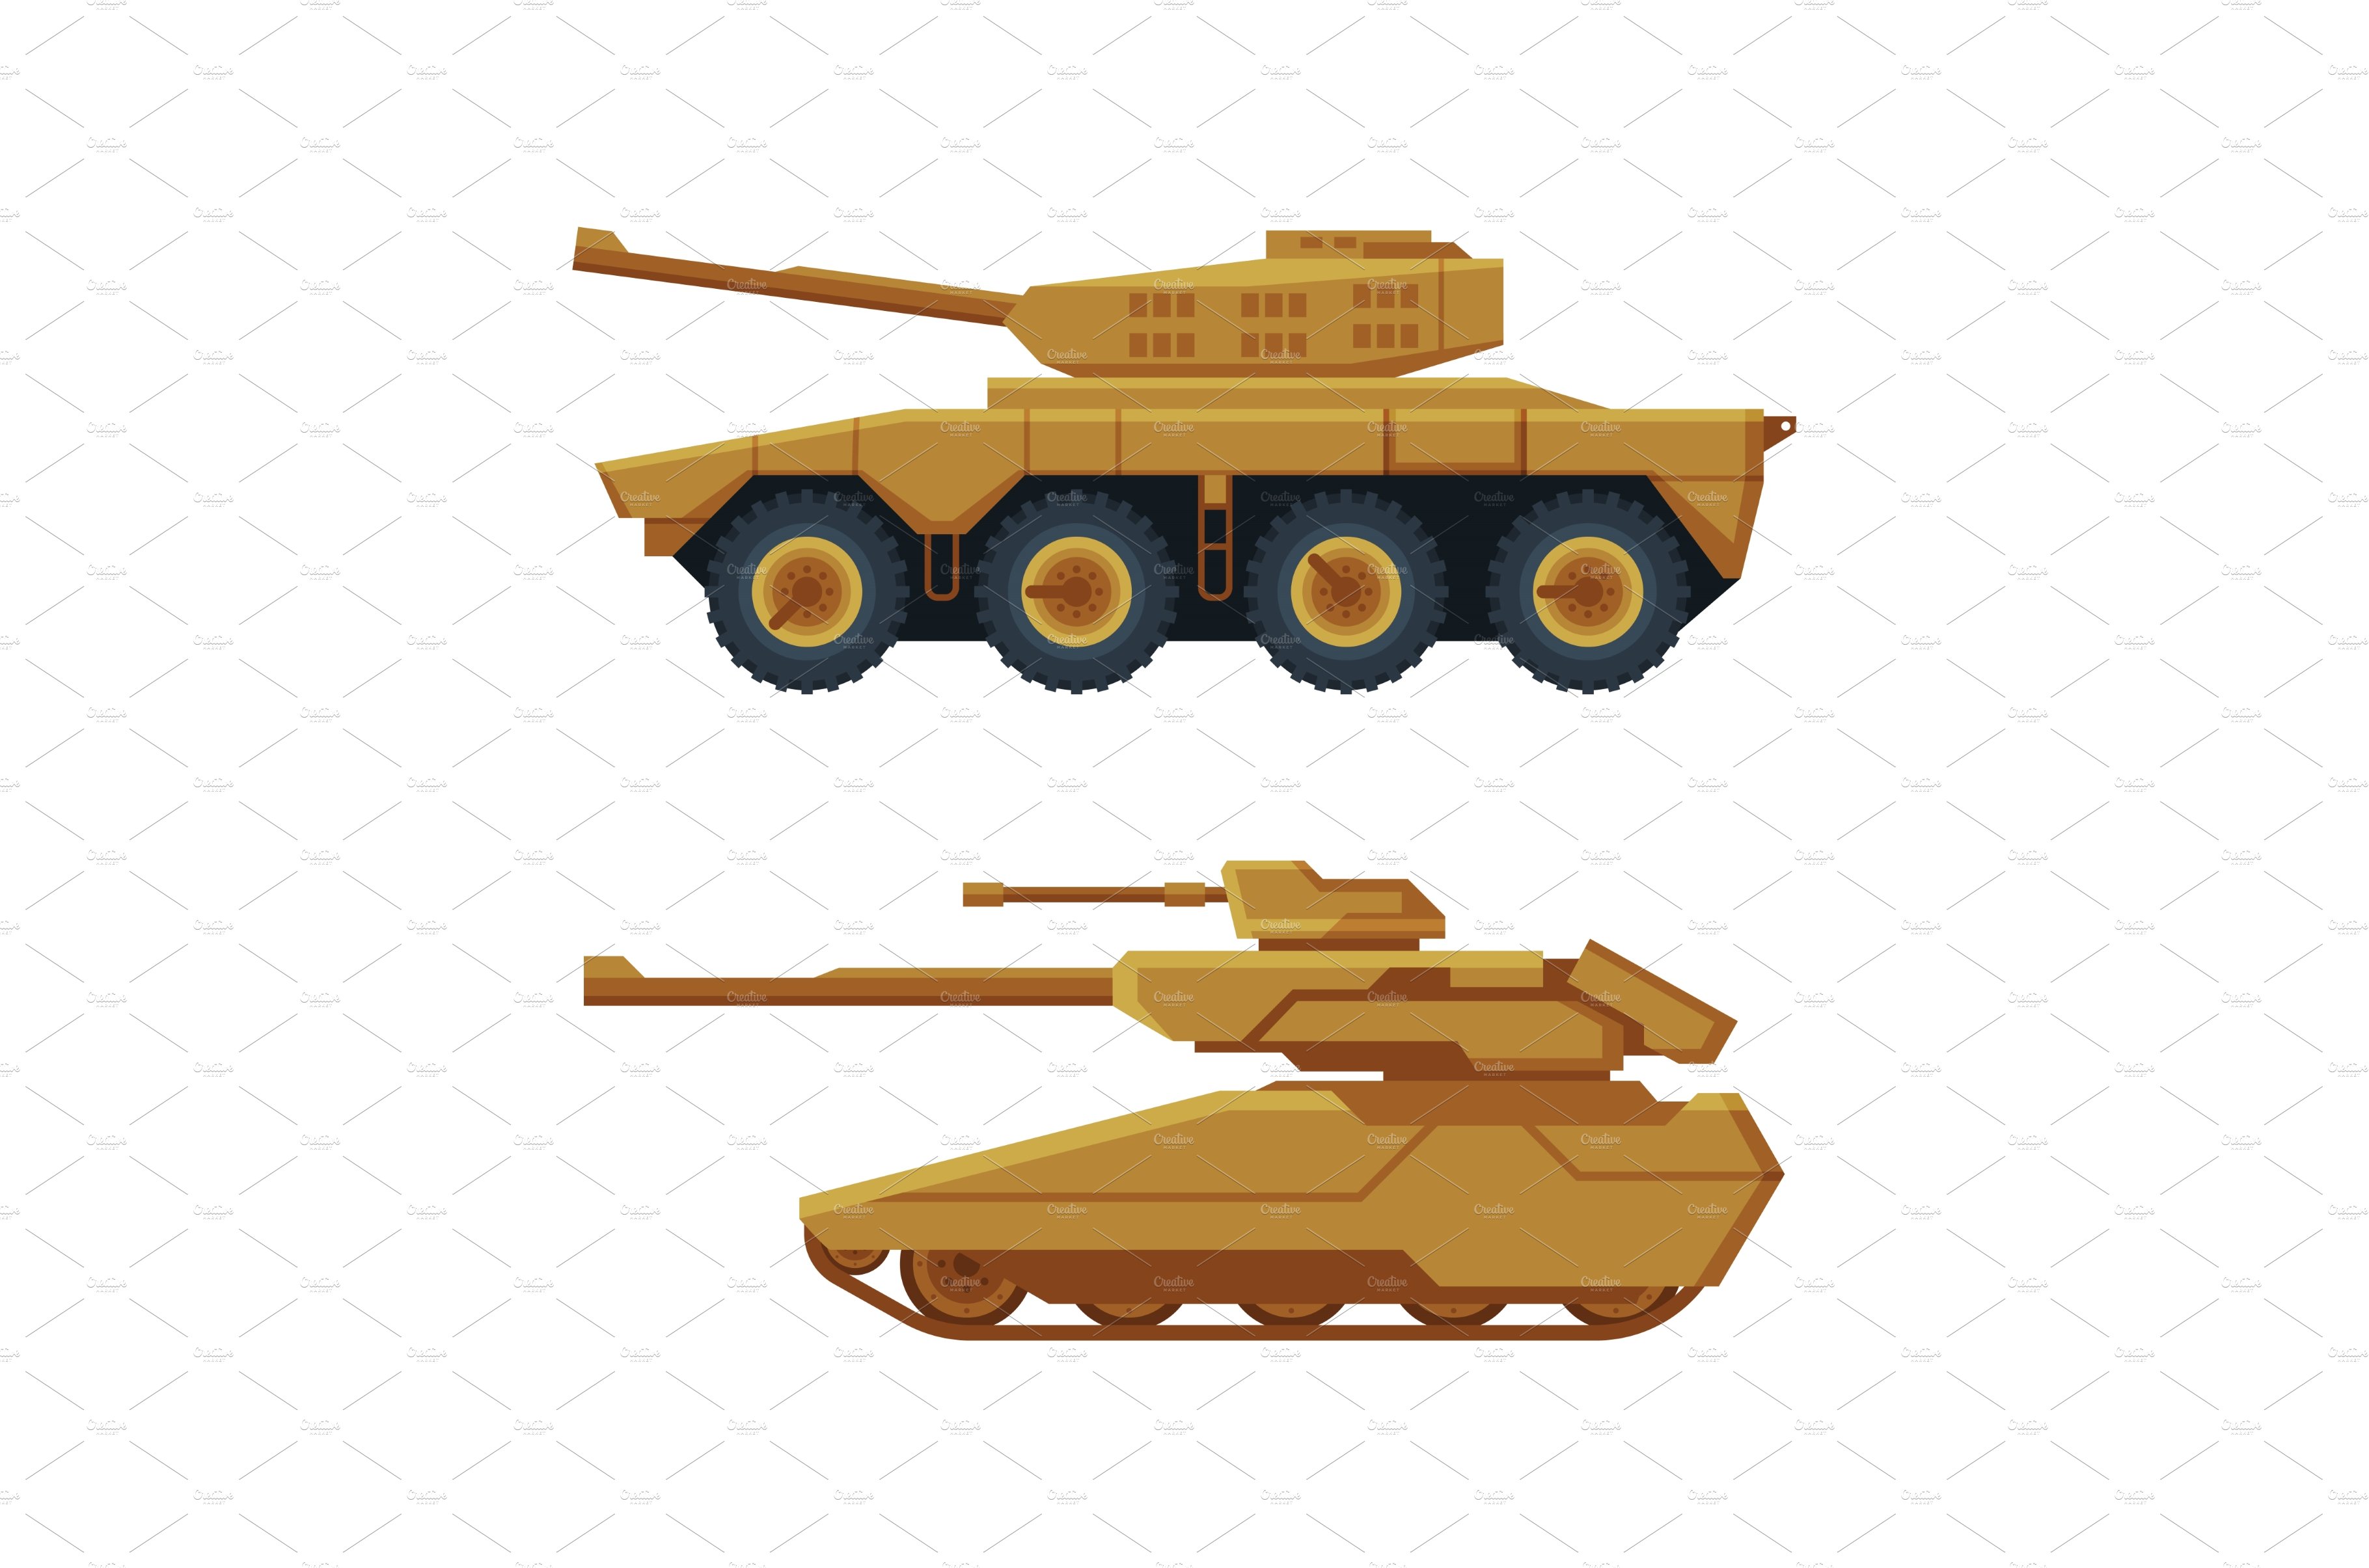 Tank as Armored Fighting Vehicle cover image.